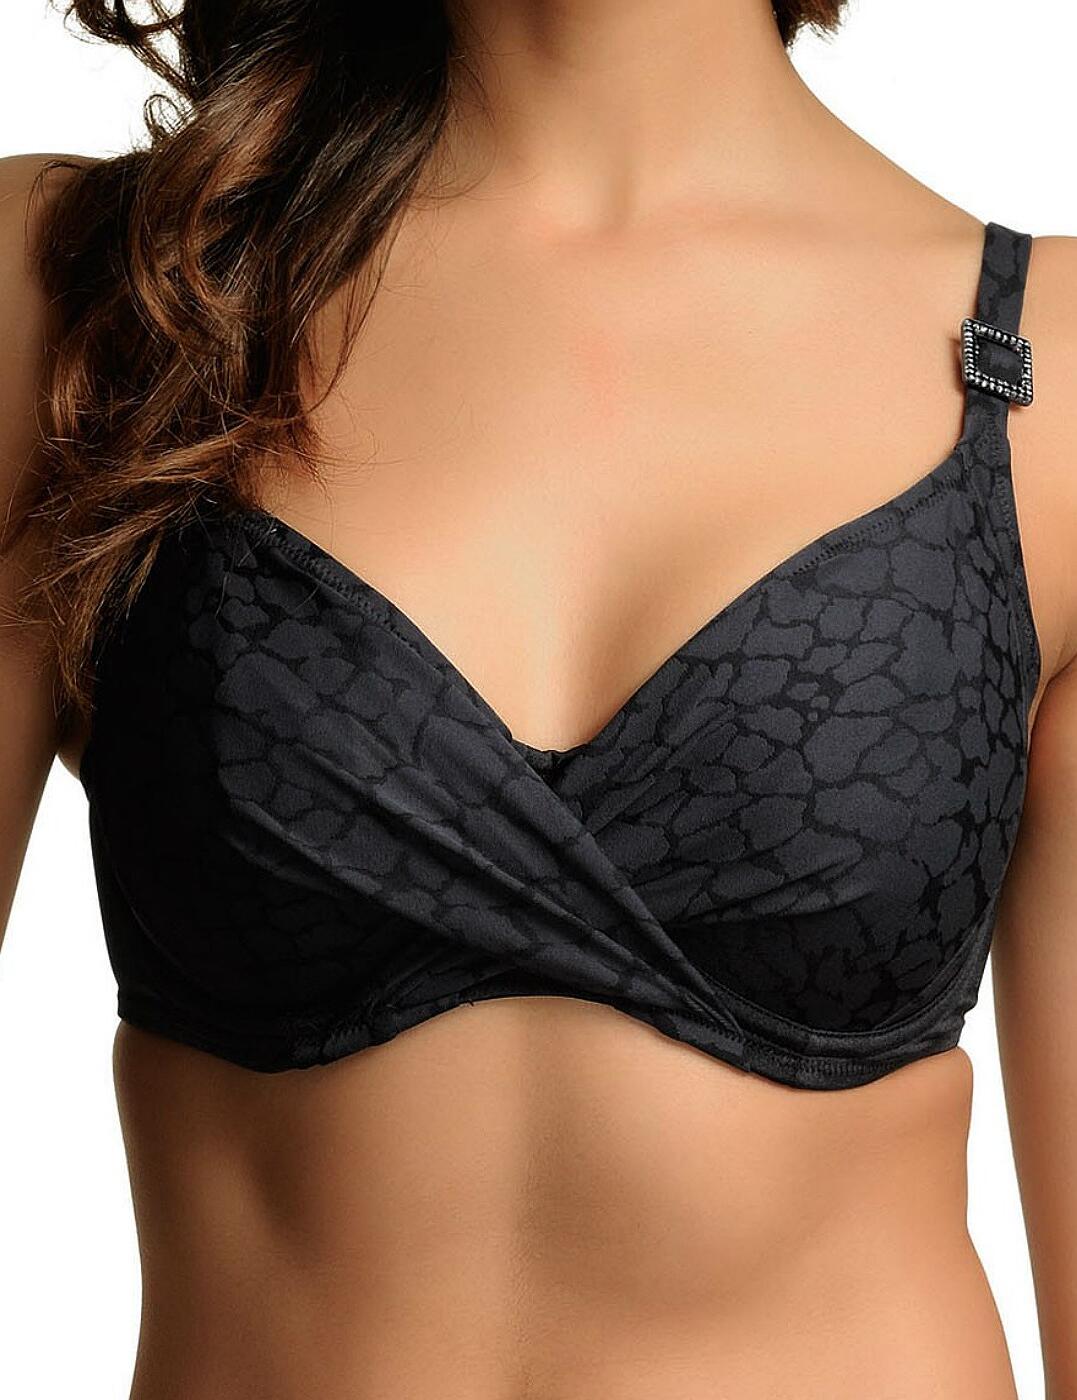 NEW Fantasie Marseille Gathered Full Cup Bikini Top ONLY 30FF